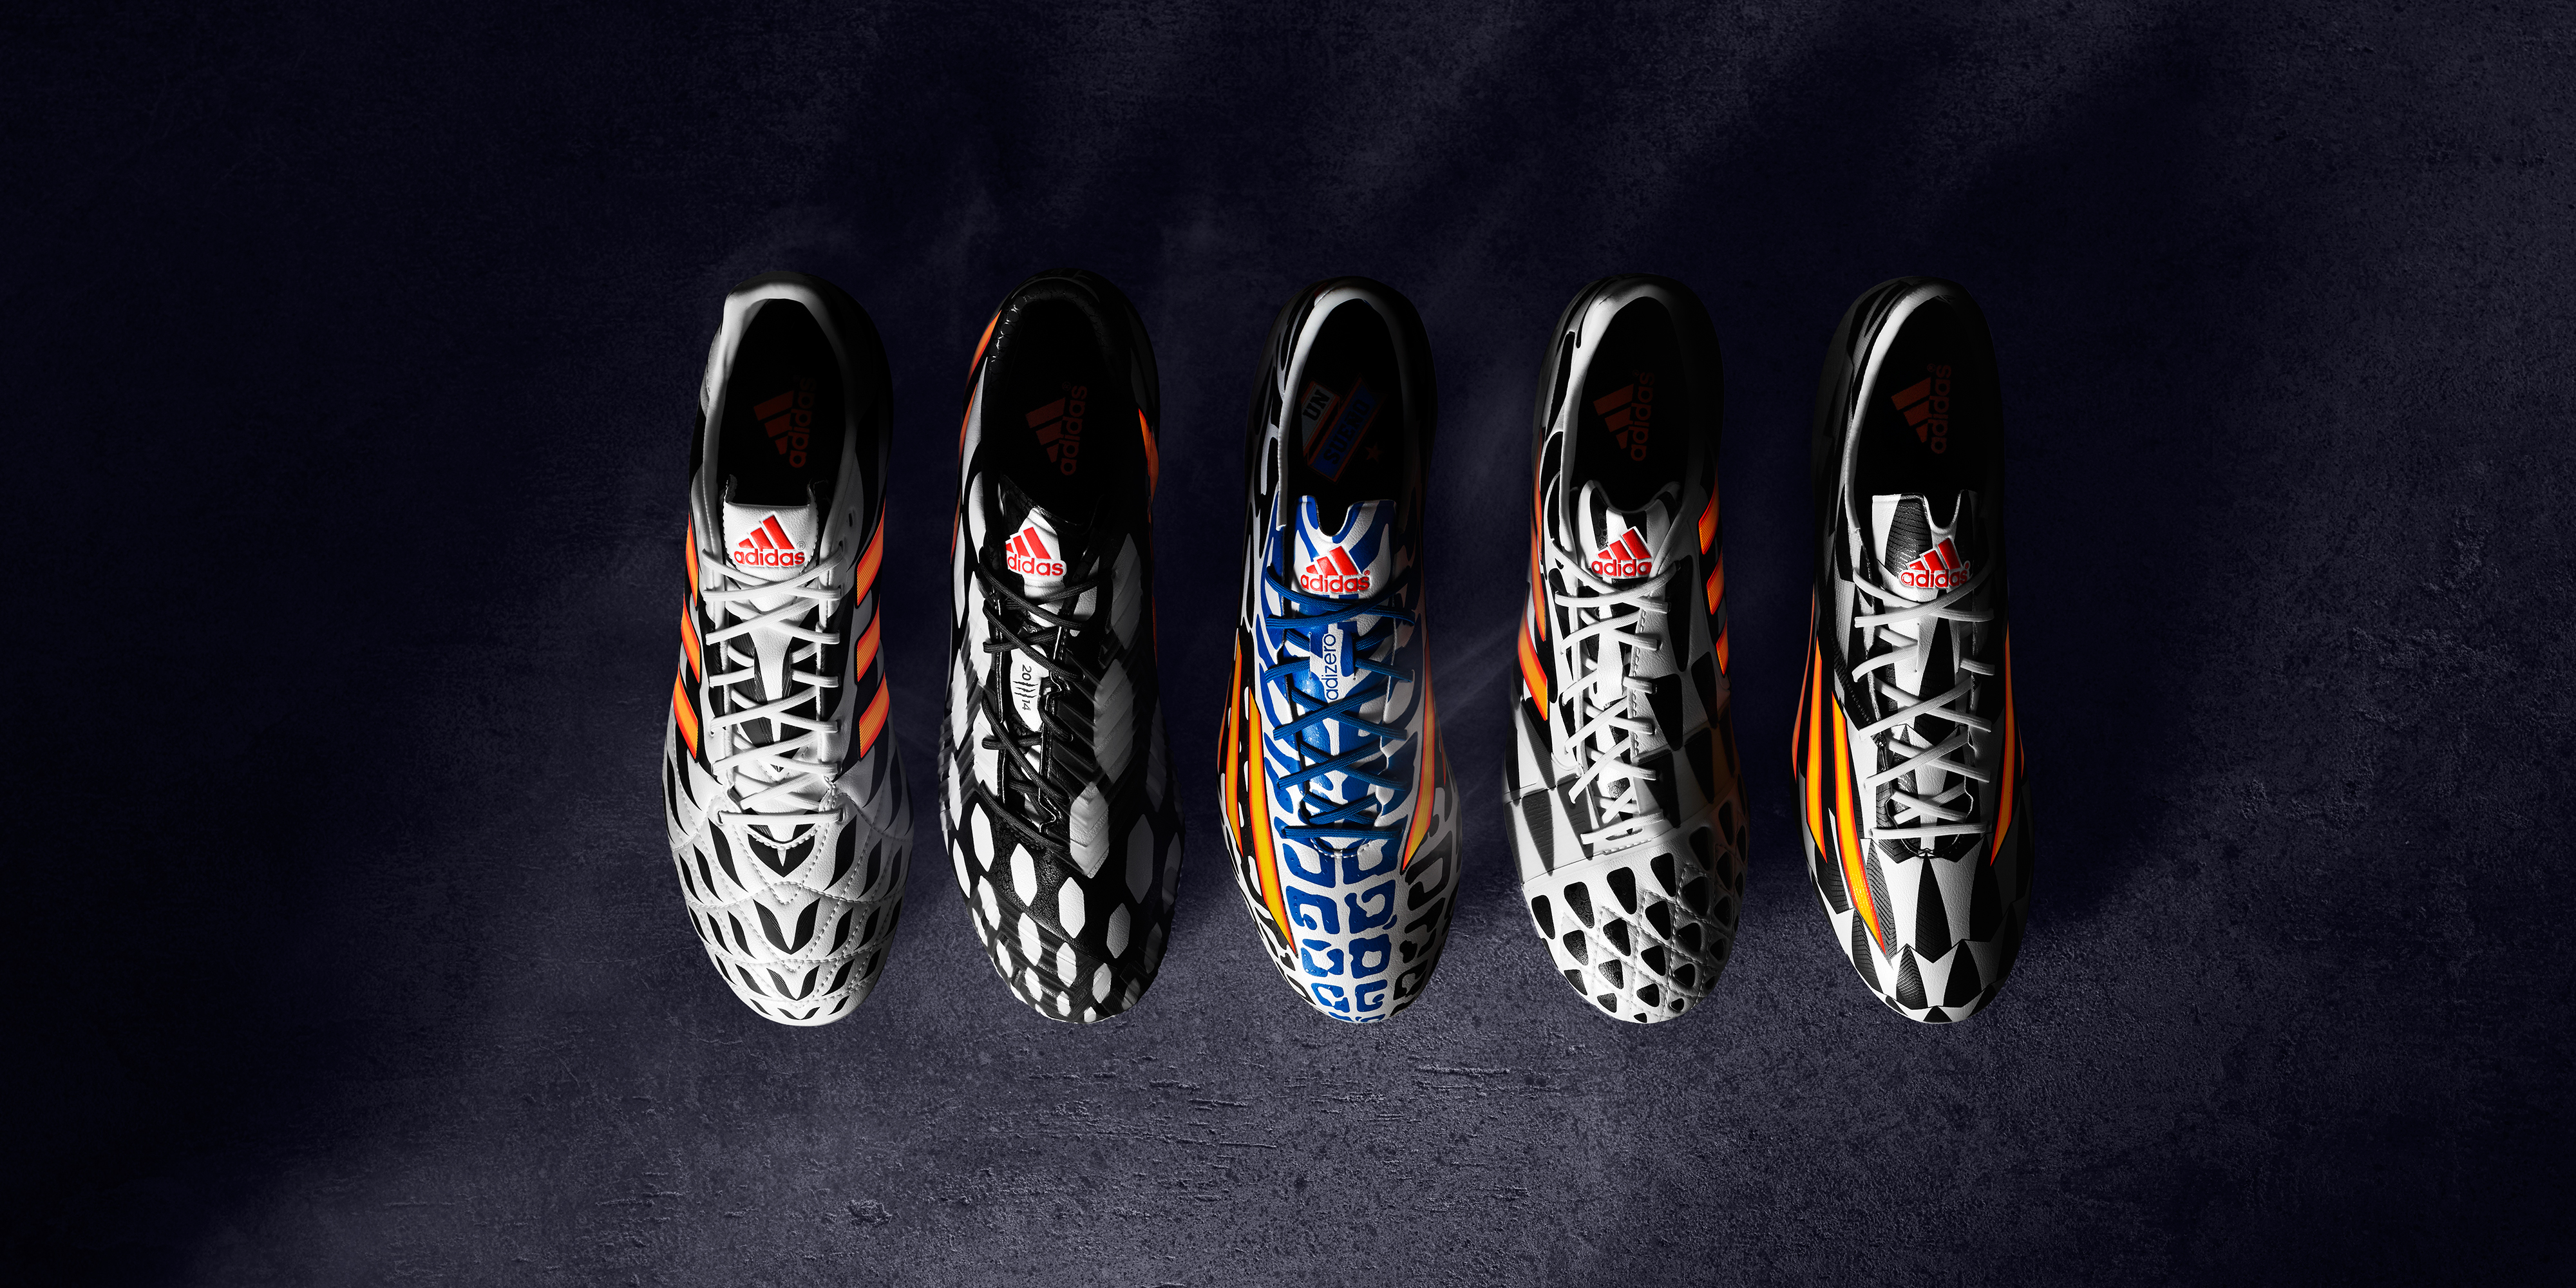 Football boot releases: adidas launch 